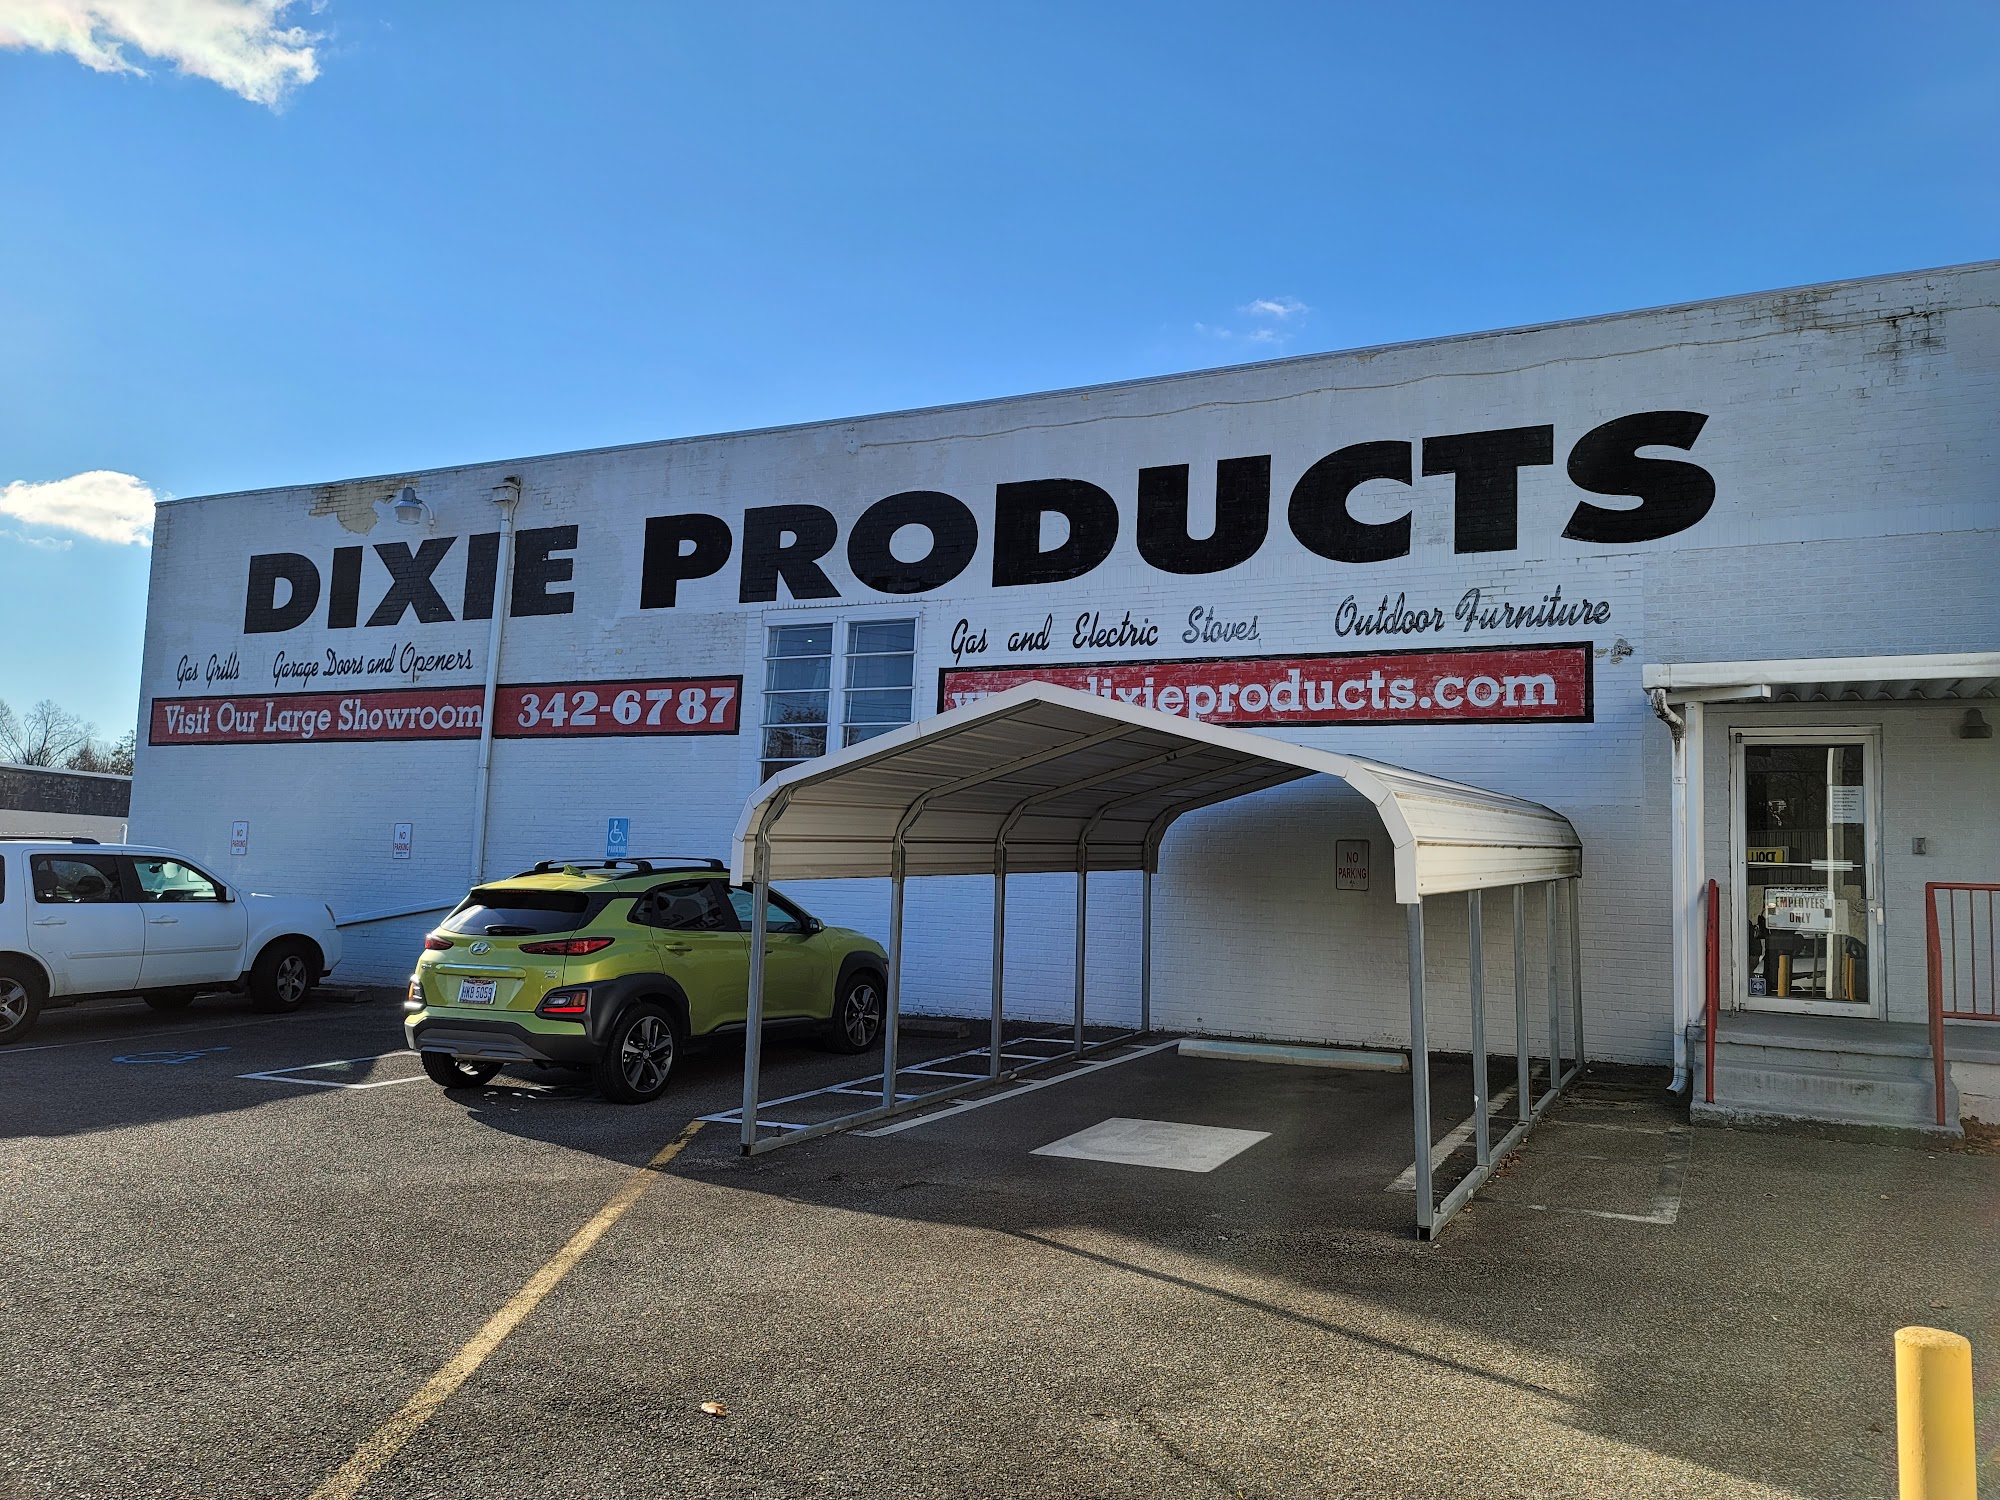 Dixie Building Products